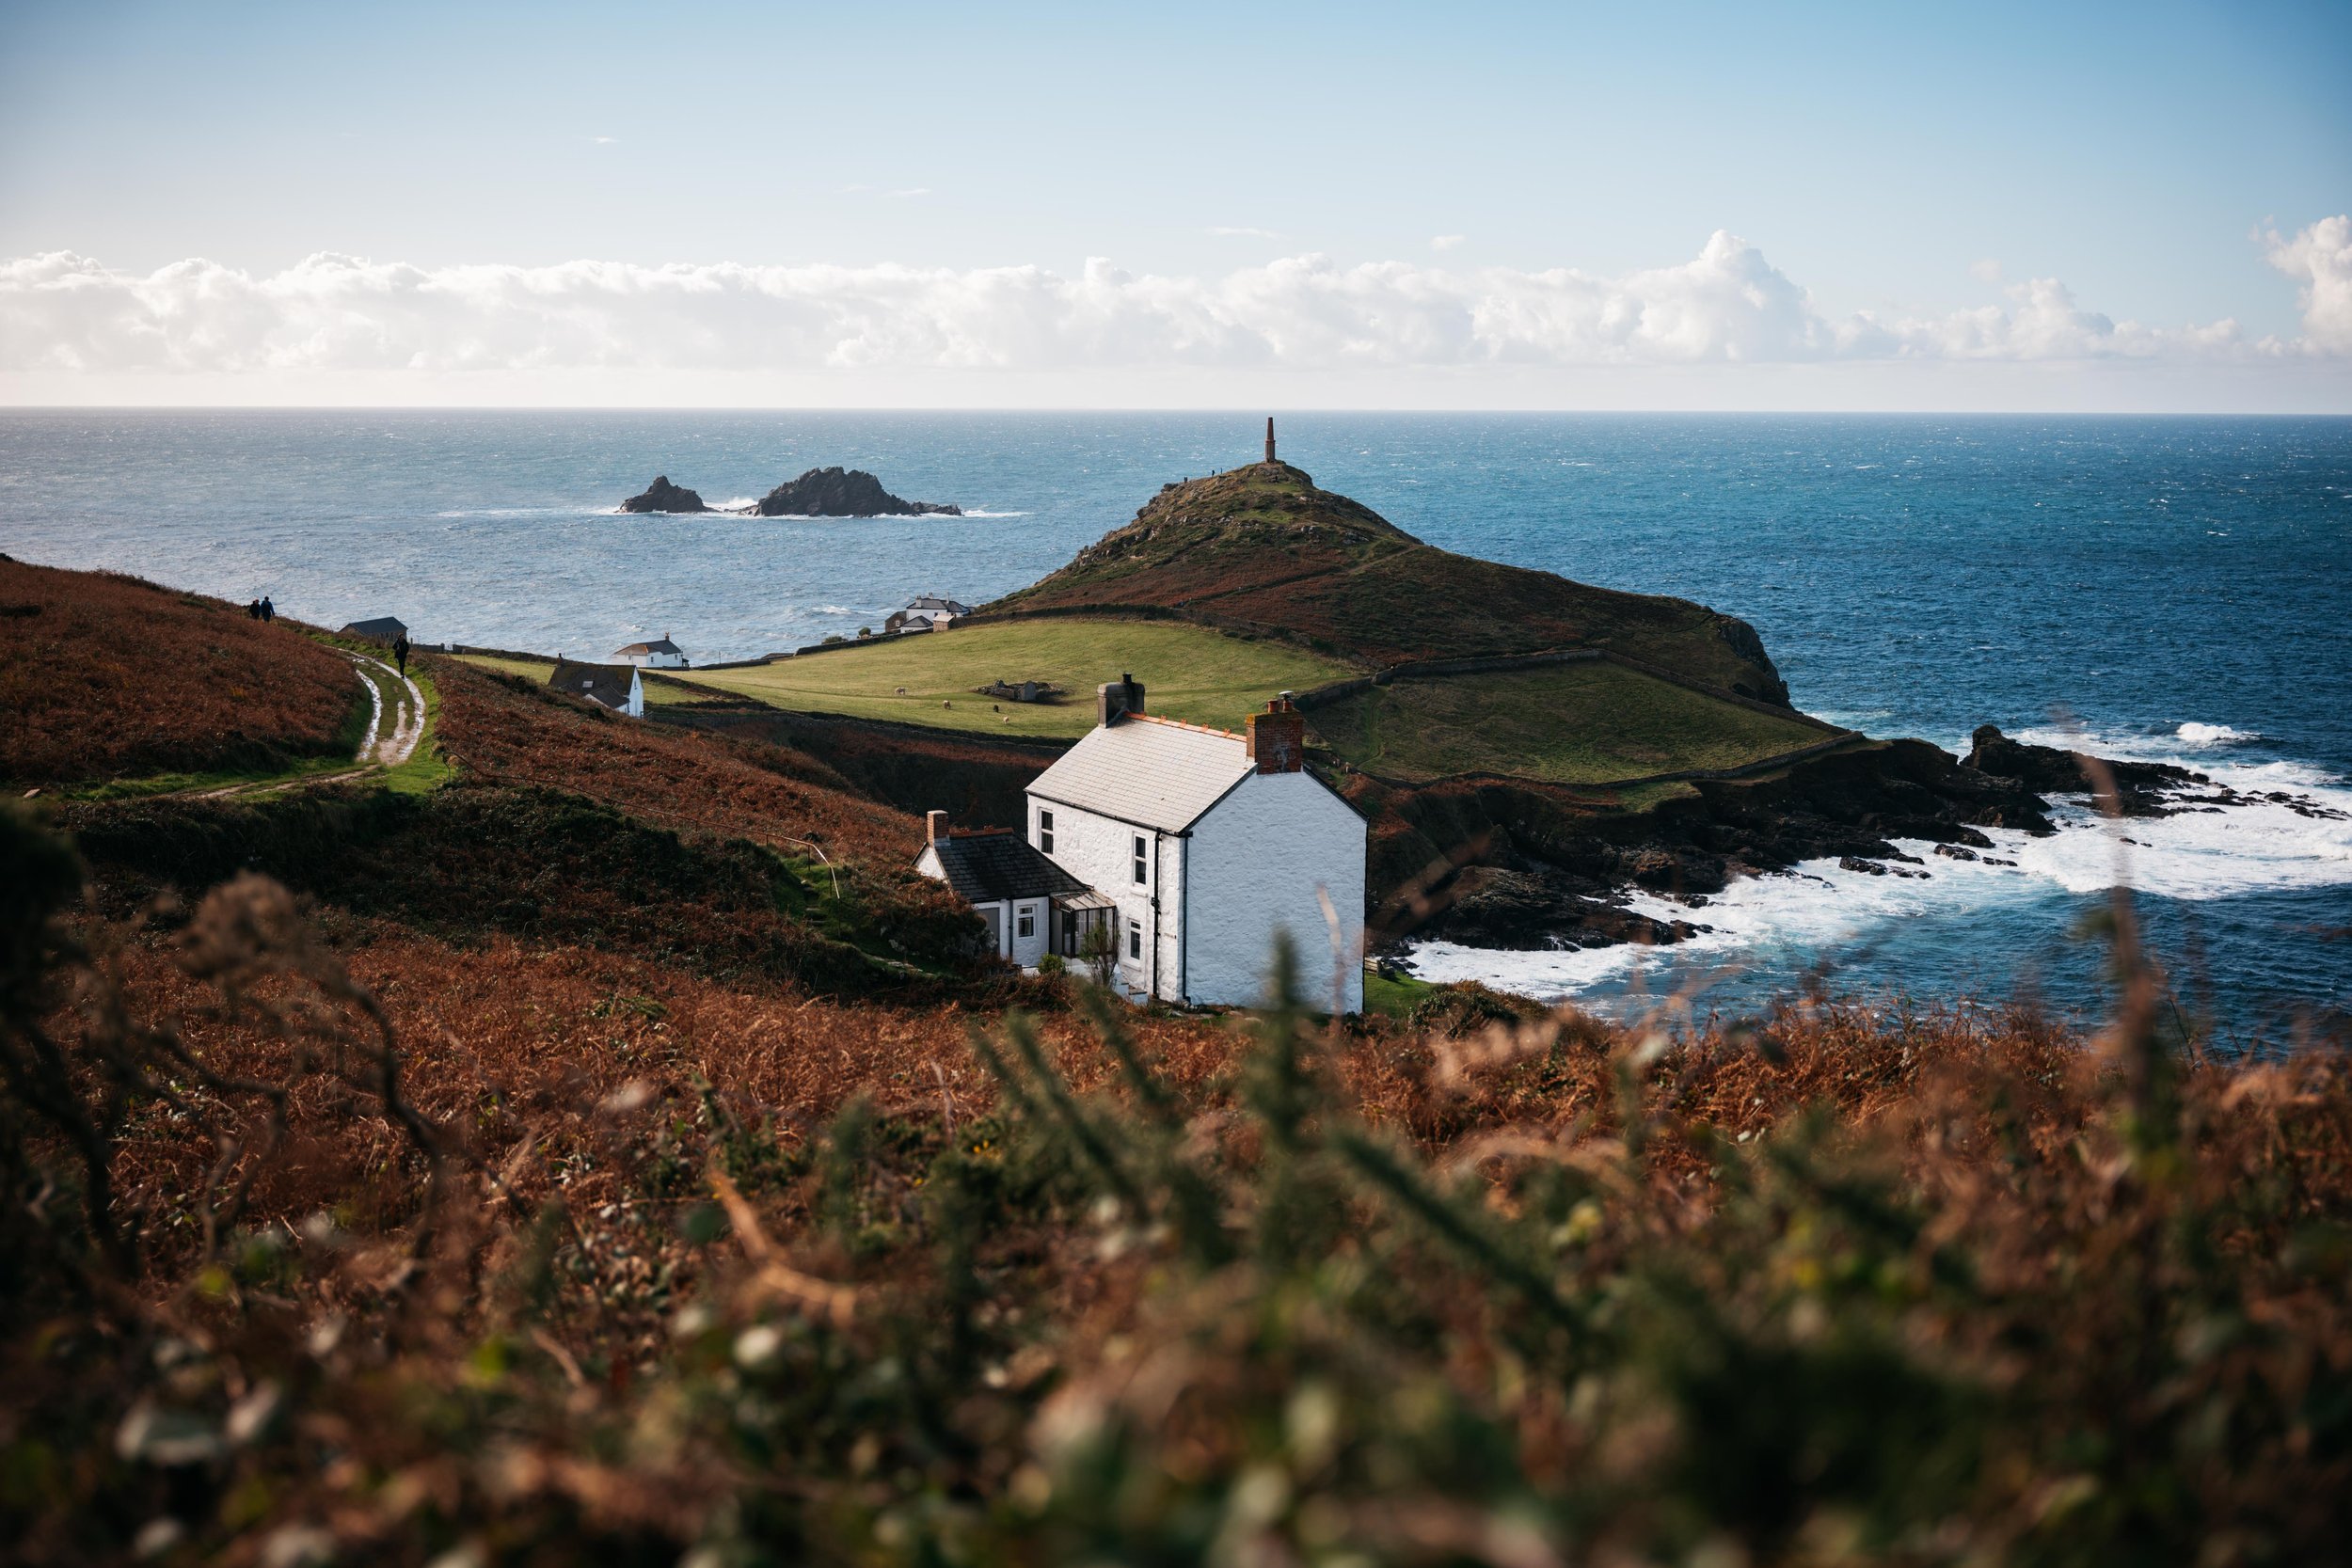  You can actually rent this house. Cape Cornwall in the distance. 